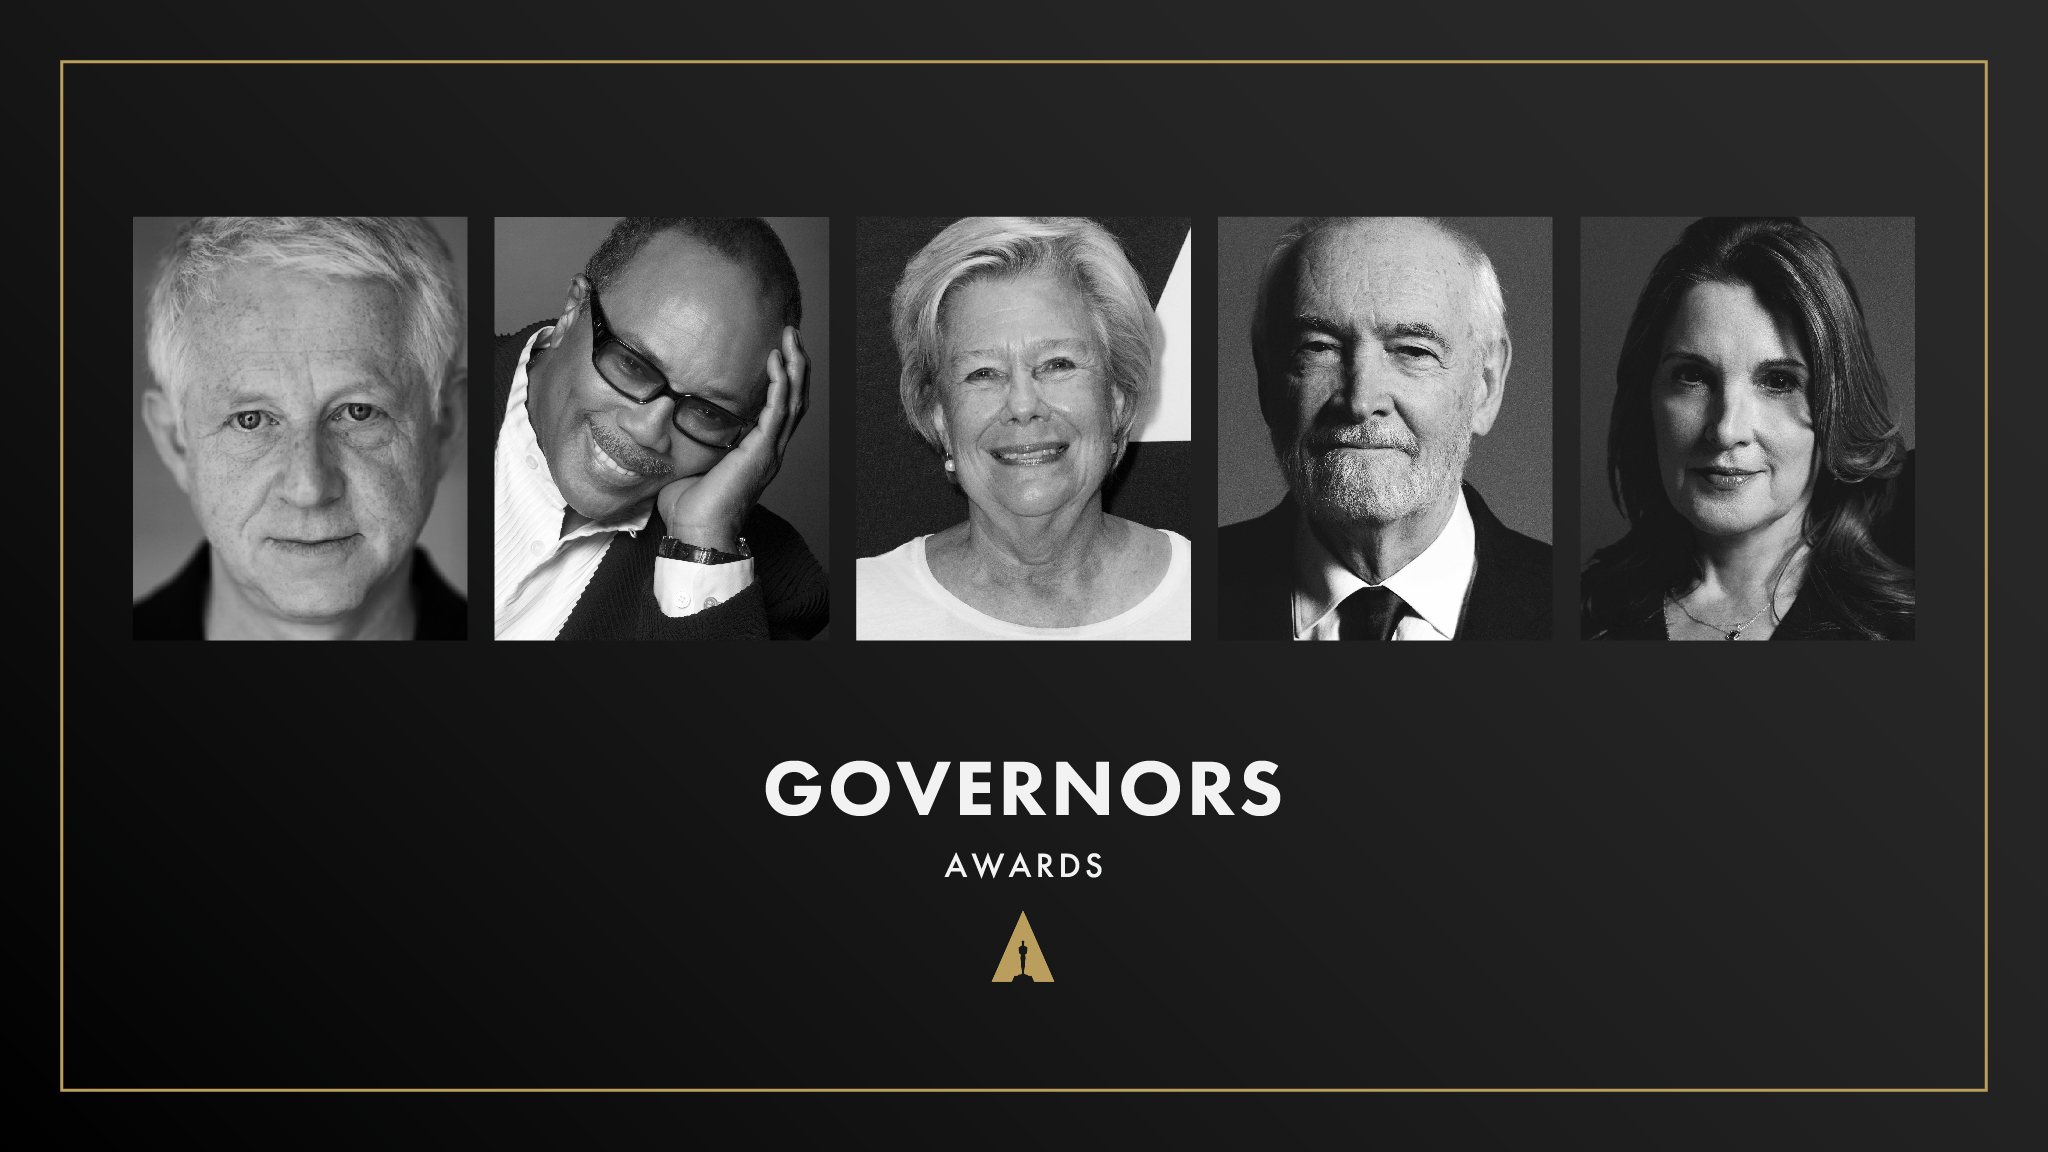 THE ACADEMY TO HONOR RICHARD CURTIS, QUINCY JONES, JULIET TAYLOR, MICHAEL G. WILSON & BARBARA BROCCOLI AT 15TH GOVERNORS AWARDS